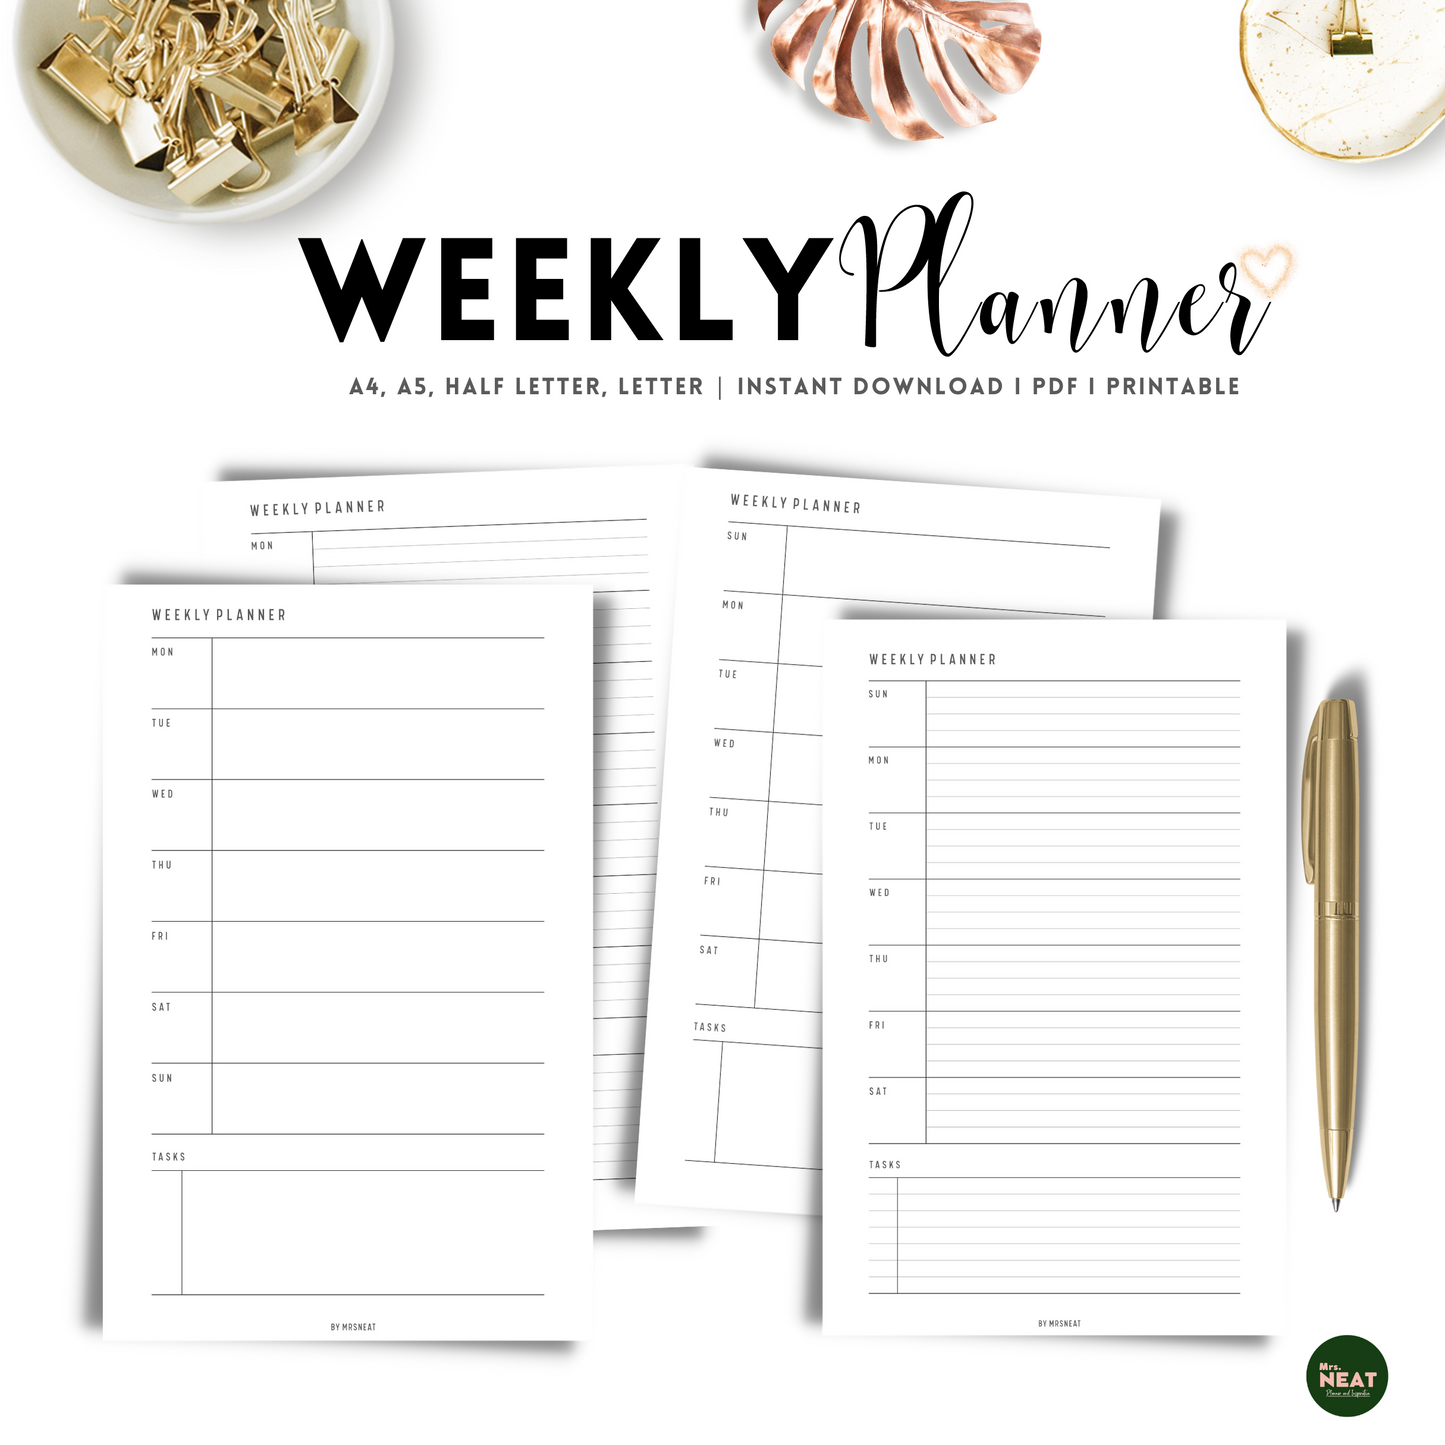 4 Pages Minimalist Weekly Planner with Sunday Start and Monday Start, Lined and Unlined